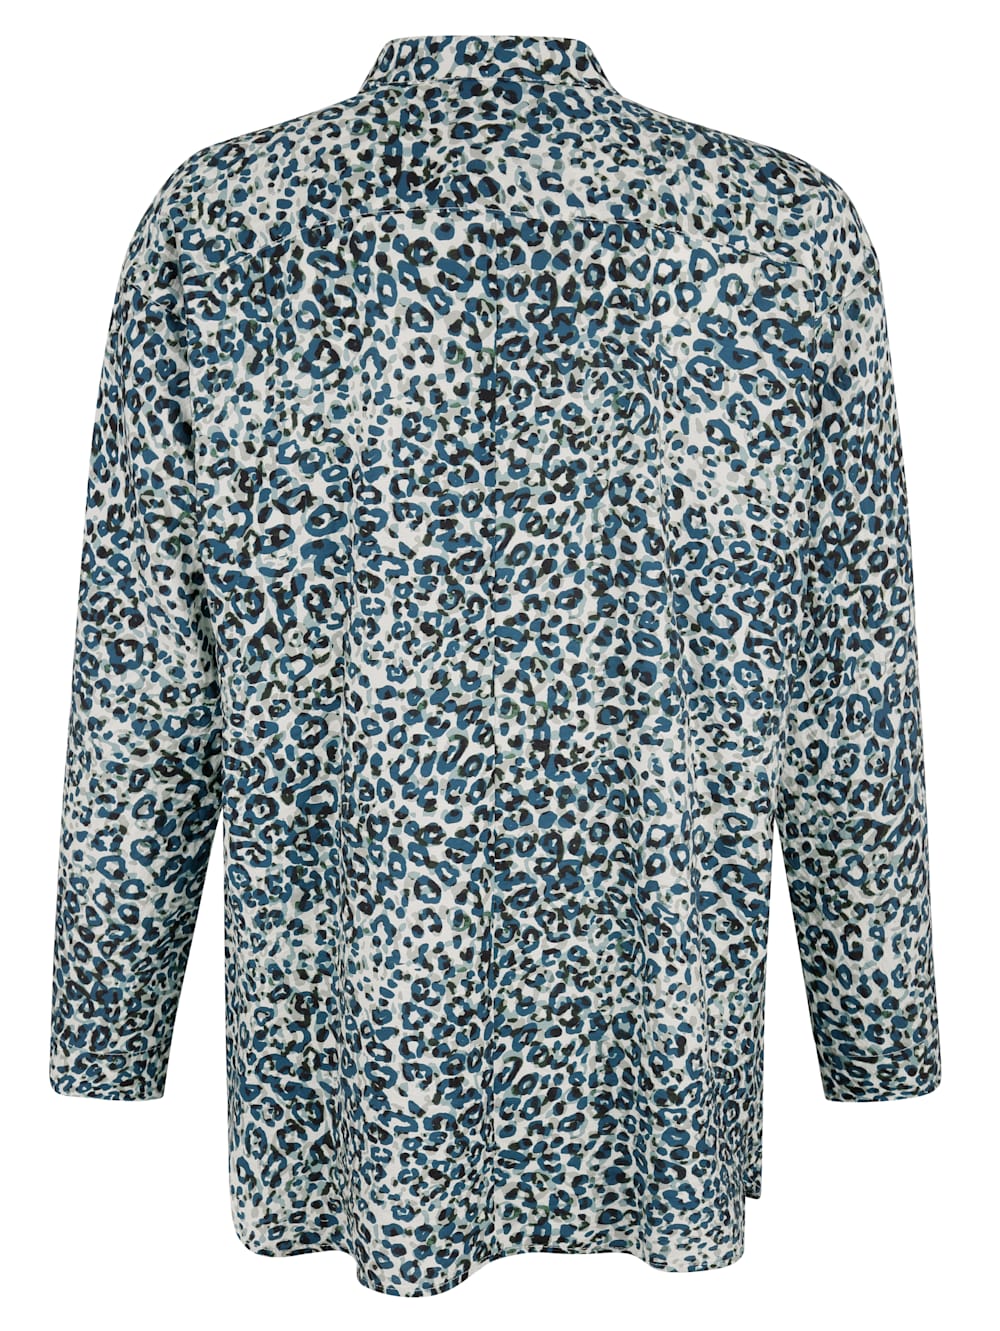 Leo-Muster Bluse in | Wenz pure Delmod tollem